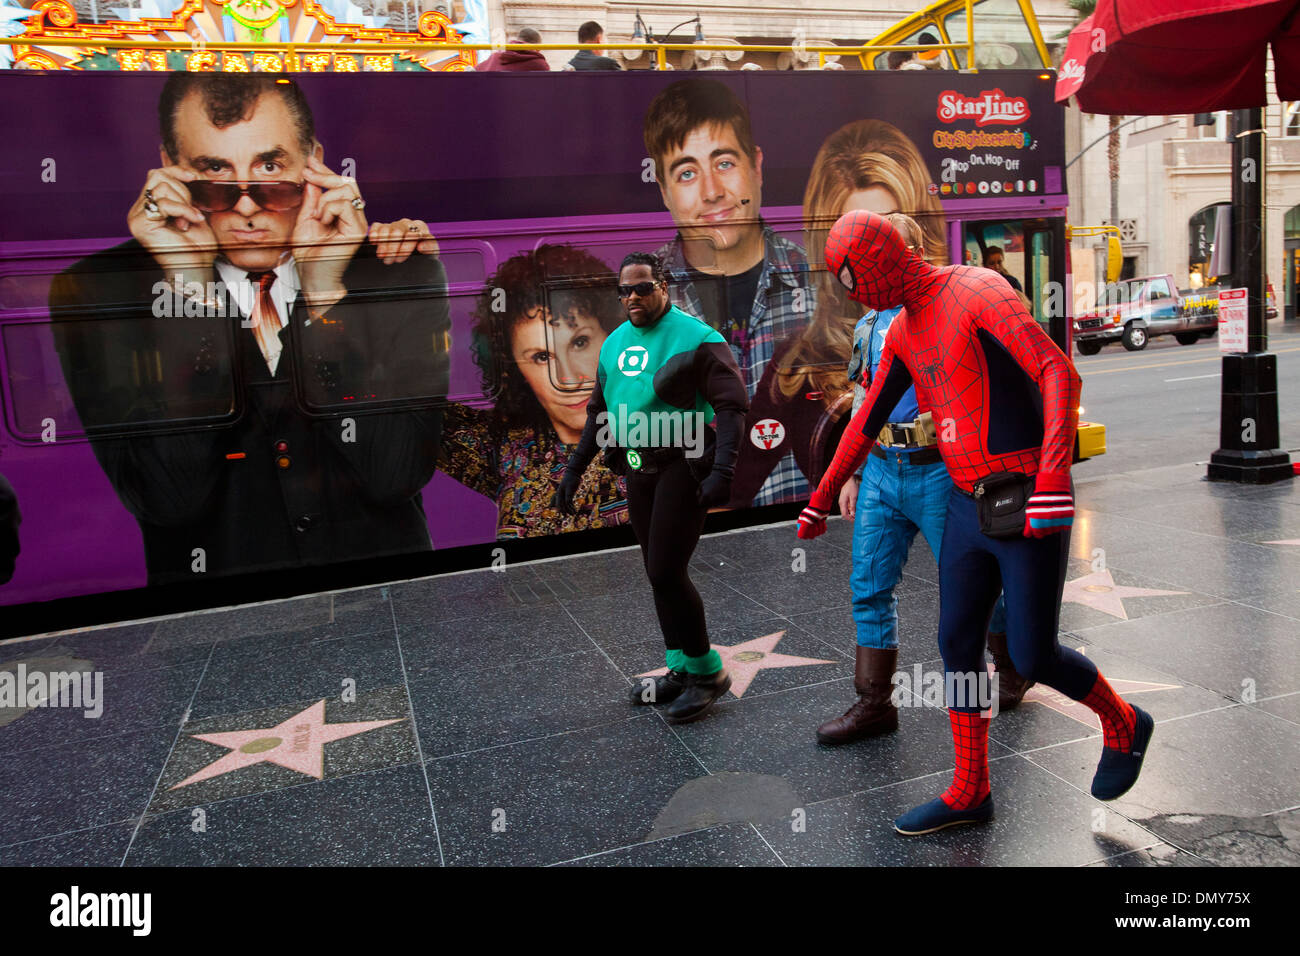 The Walk of Fame, Hollywood Boulevard, Los Angeles, California, United States of America Stock Photo